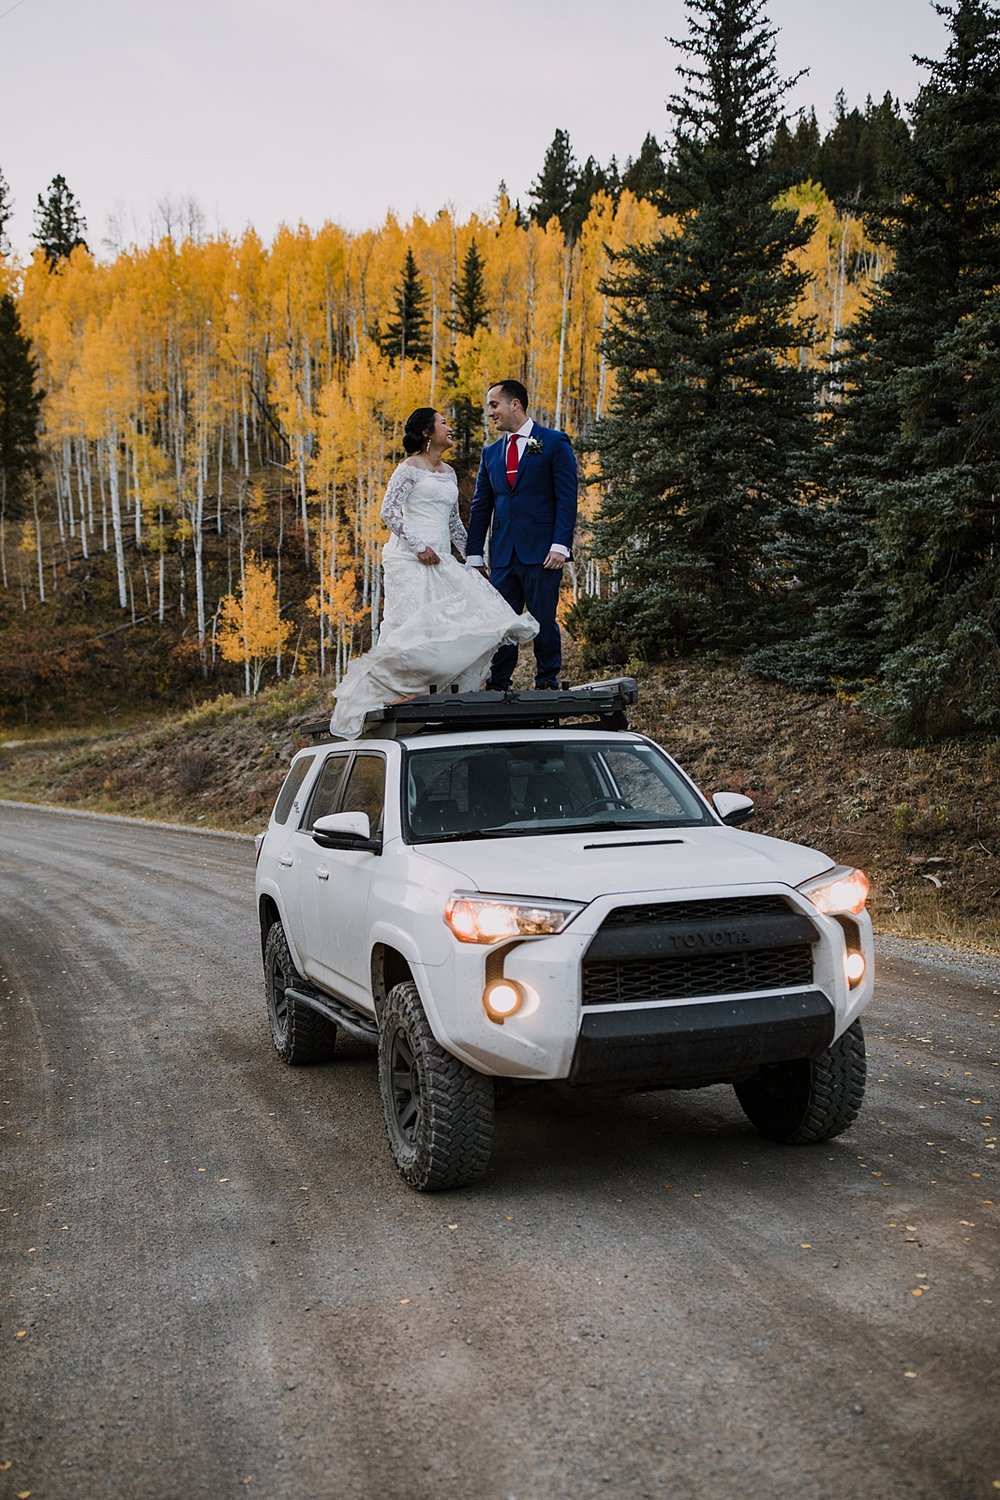 bride and groom dancing on car, bride and groom standing on toyota 4runner, offroad elopement with a toyota 4runner, 4x4 elopement, mountain pass road elopement, 4wd adventurous mountain elopement